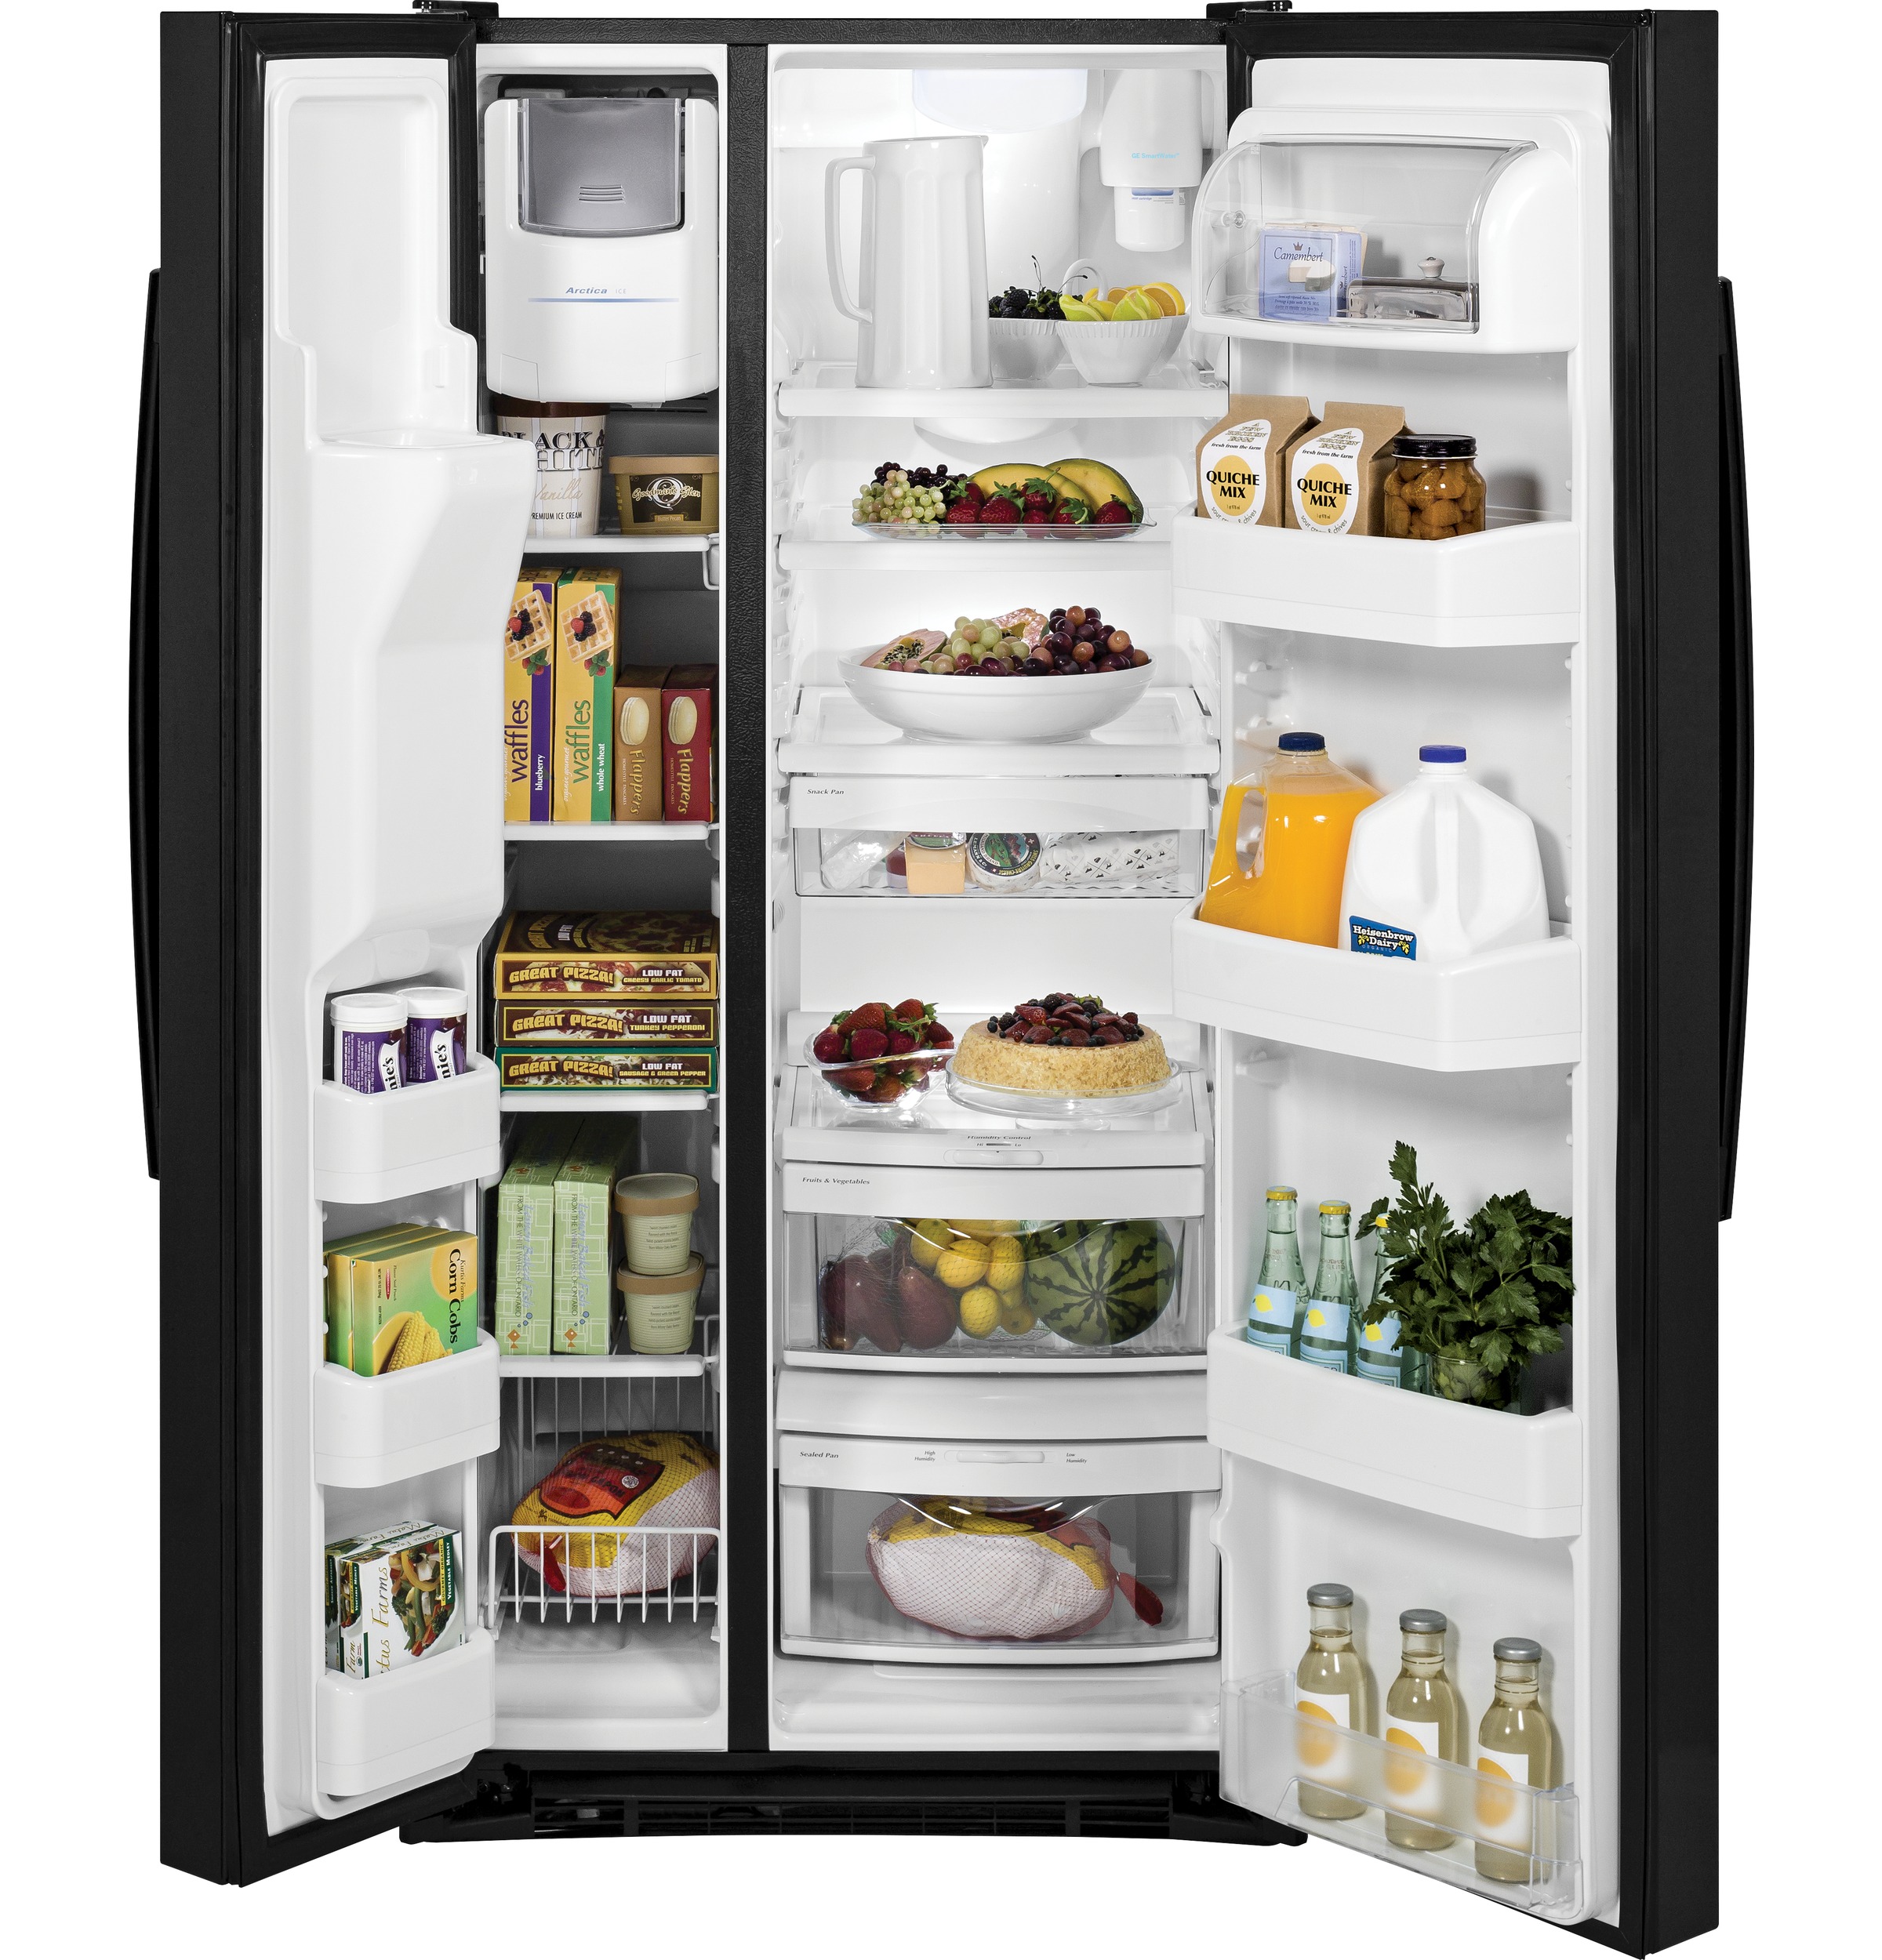 Questions and Answers: GE 22.5 Cu. Ft. Side-by-Side Refrigerator with ...